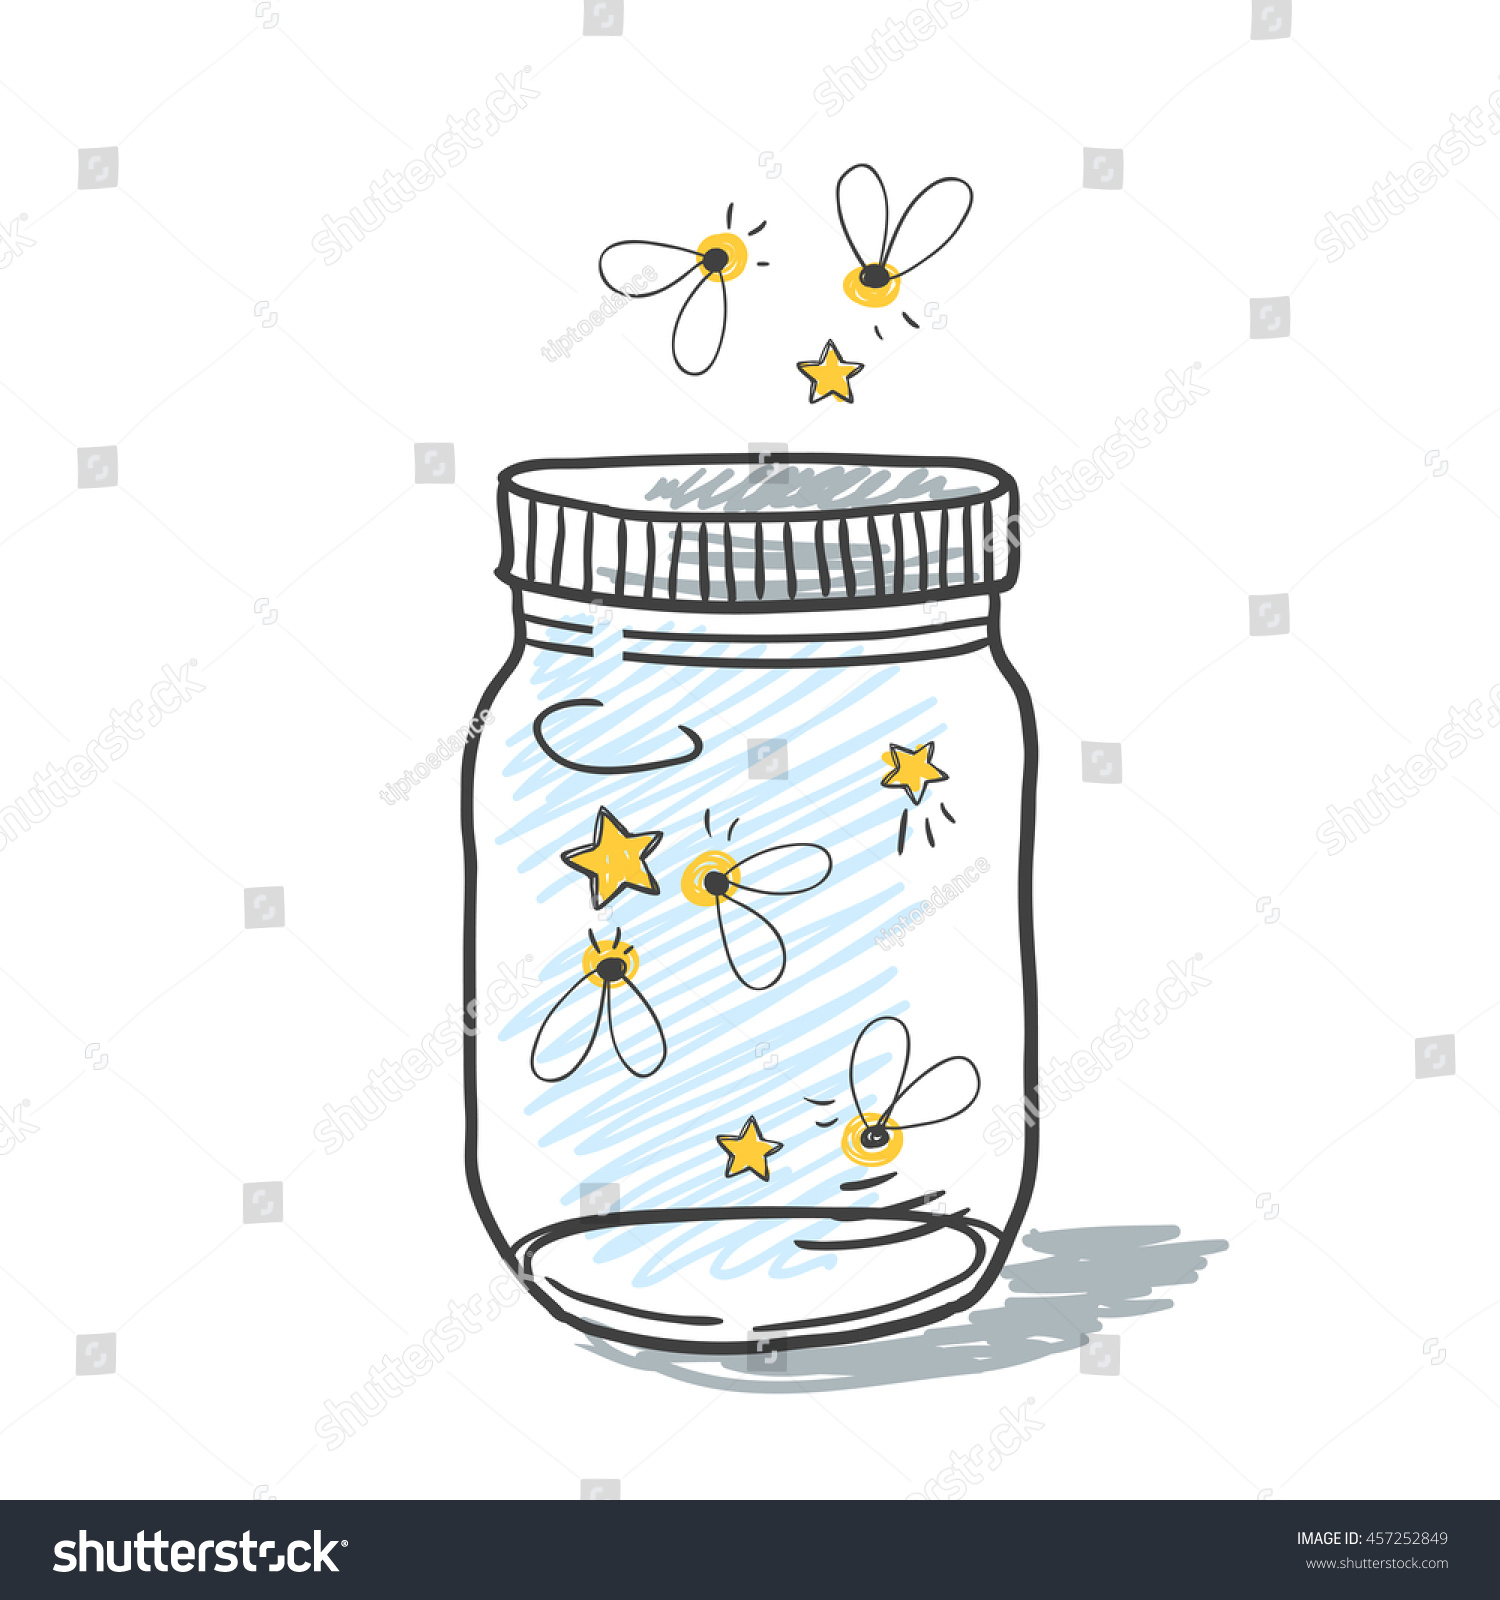 Fireflies in a jar clipart 6 » Clipart Station.